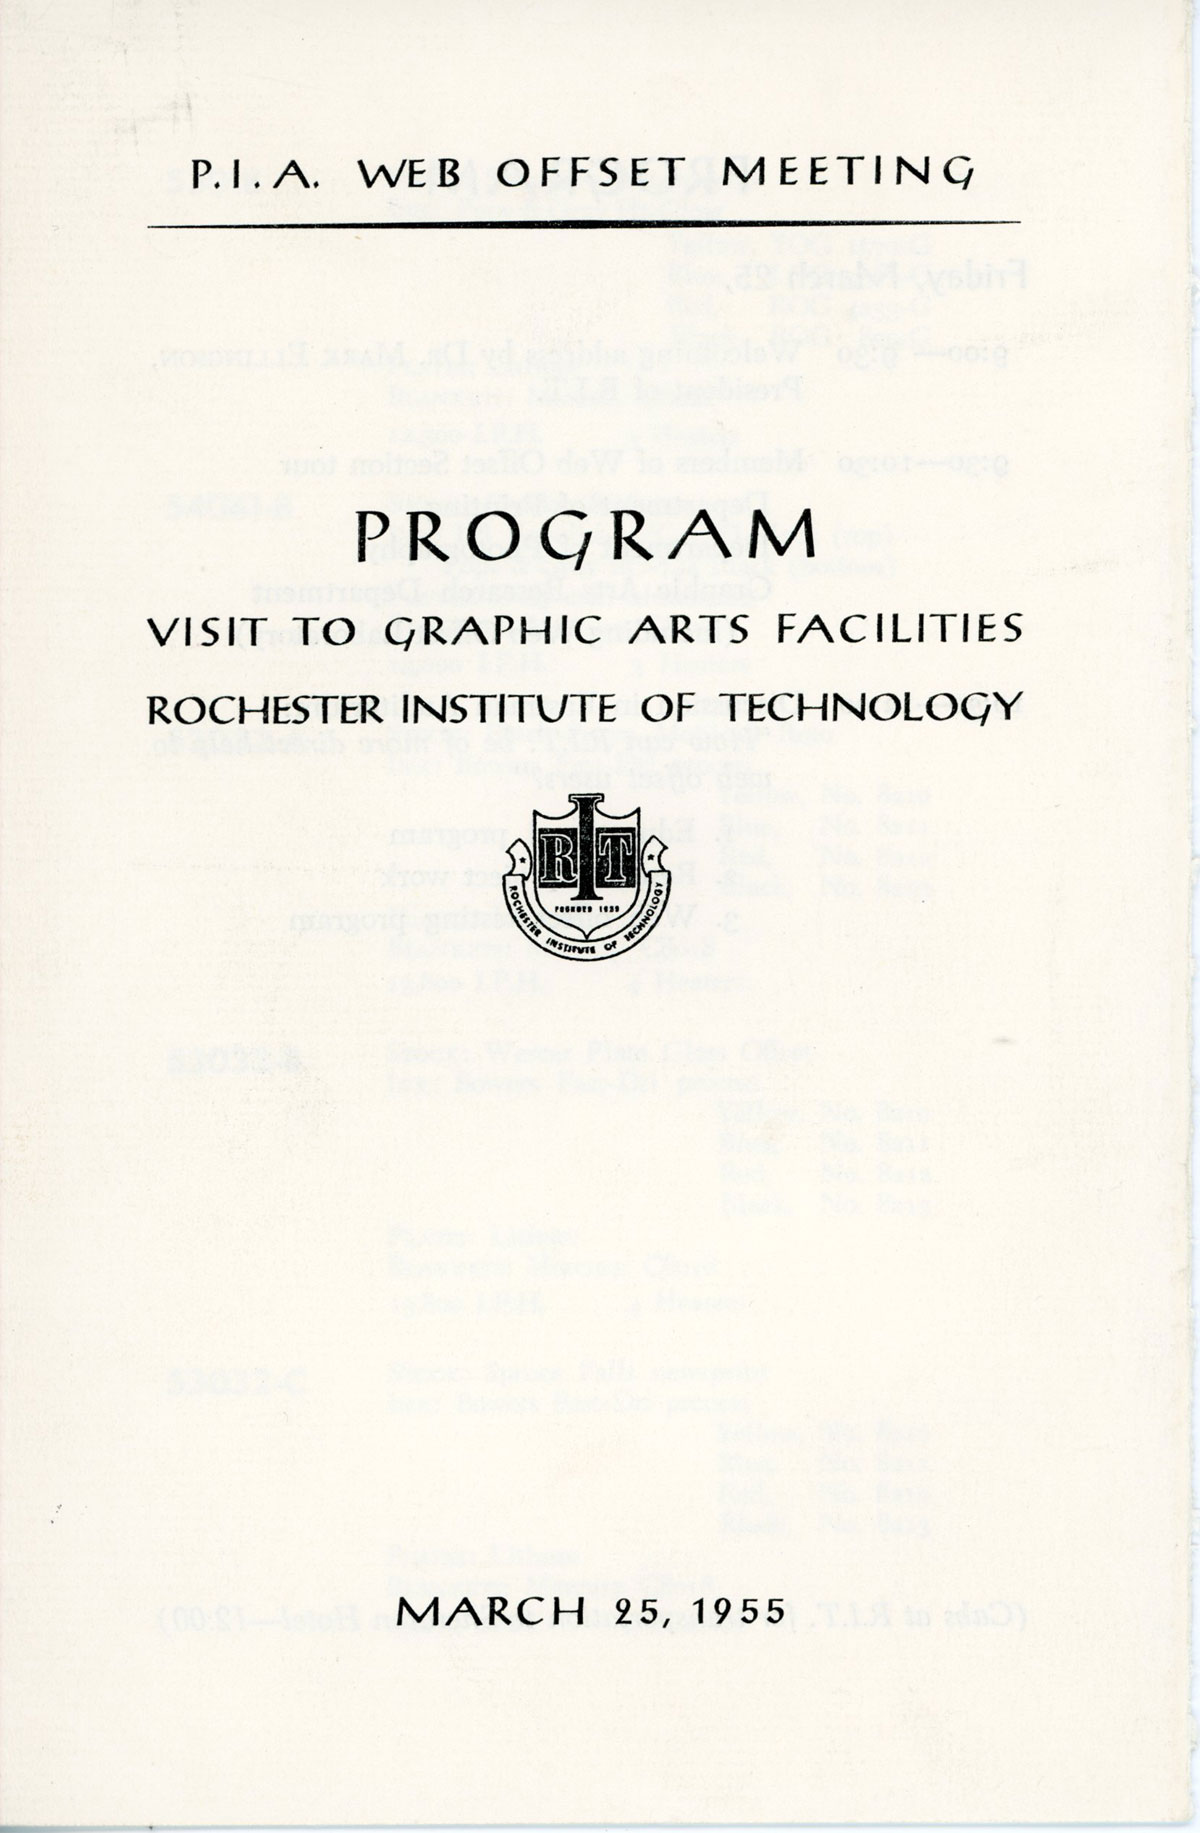 P.I.A. Web Offset Meeting Program visit to graphic arts facilities Rochester Institute of Technology March 25, 1955